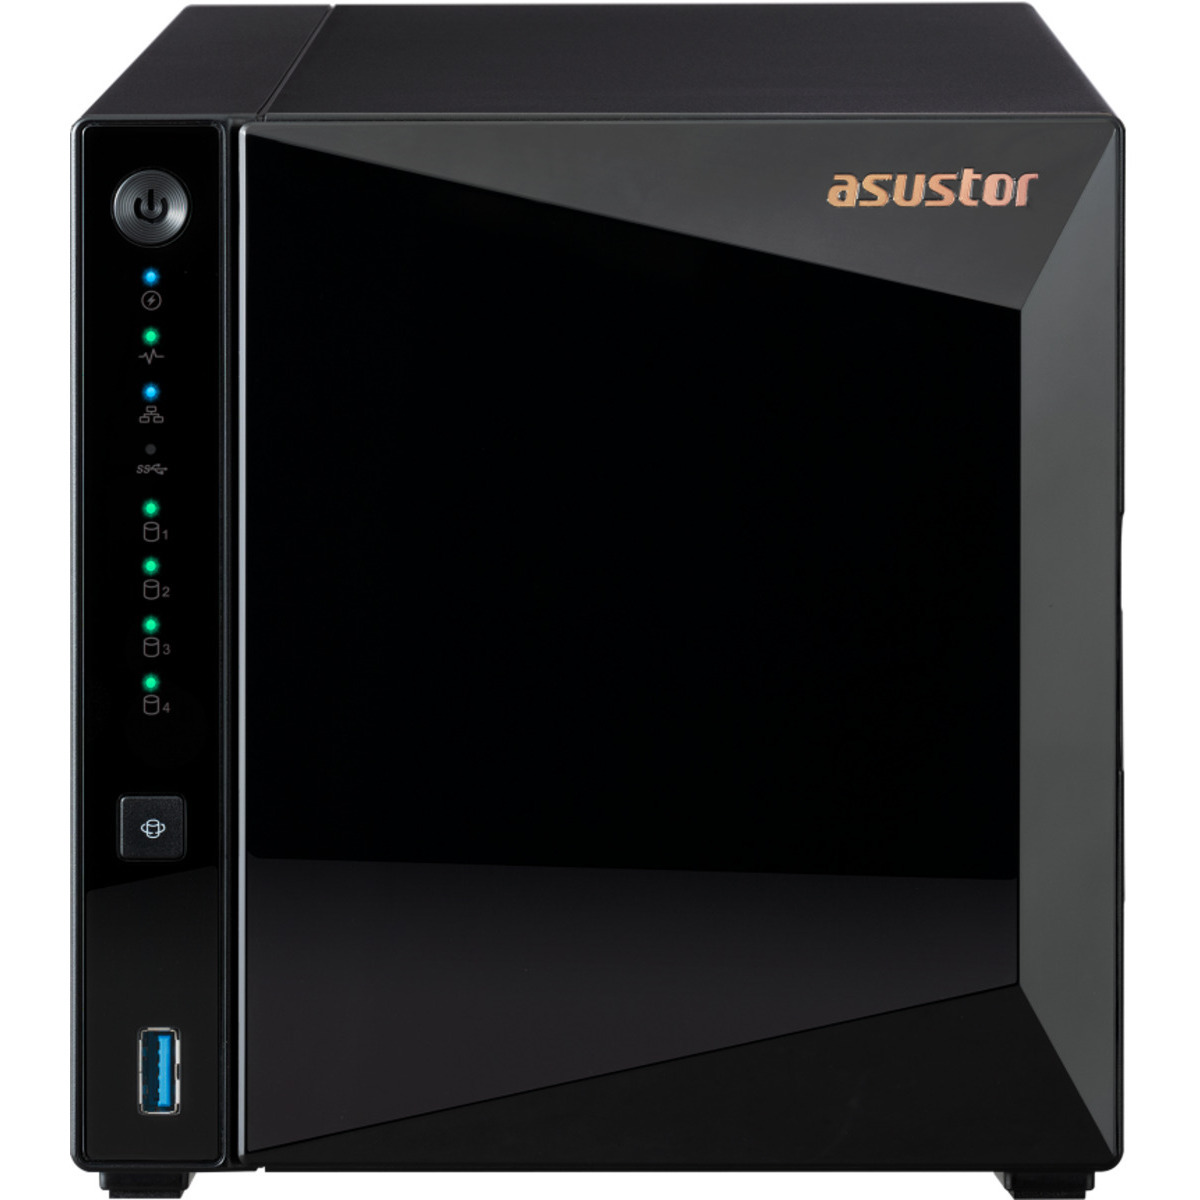 buy $631 ASUSTOR DRIVESTOR 4 Pro AS3304T 8tb Desktop NAS - Network Attached Storage Device 4x2000gb Seagate BarraCuda ST2000DM008 3.5 7200rpm SATA 6Gb/s HDD CONSUMER Class Drives Installed - Burn-In Tested - ON SALE - nas headquarters buy network attached storage server device das new raid-5 free shipping usa DRIVESTOR 4 Pro AS3304T